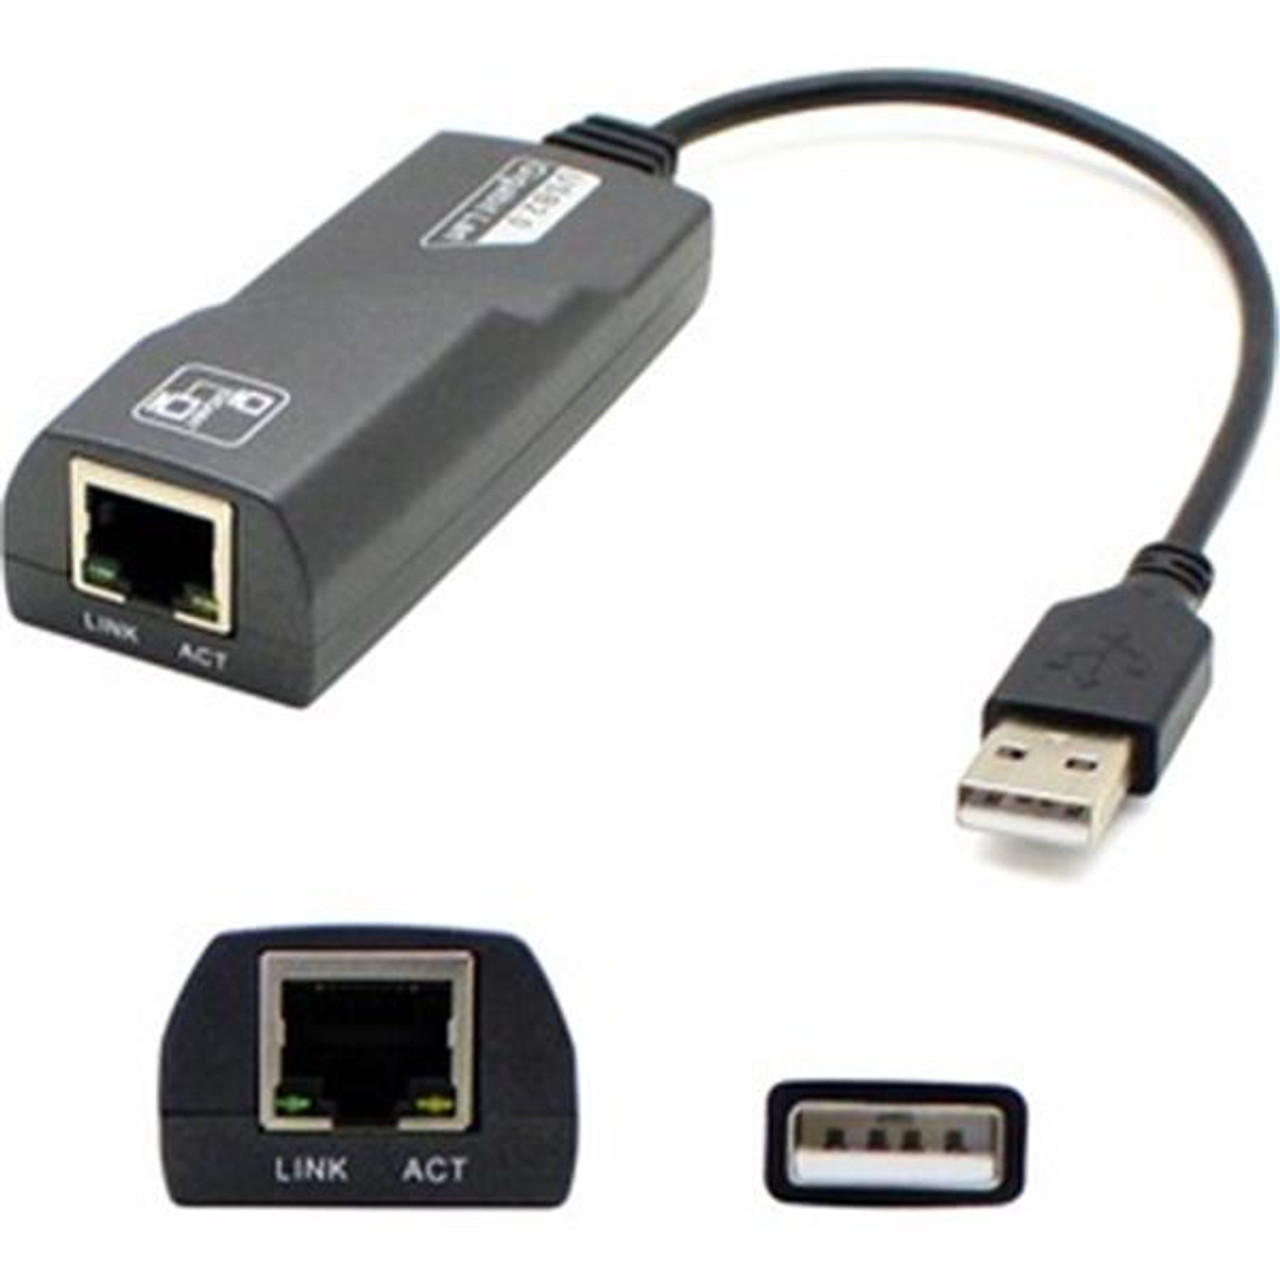 0A36322-AOK AddOn Usb 2.0 To Rj-45 Network Adapter Compare To Lenovo 0a36322